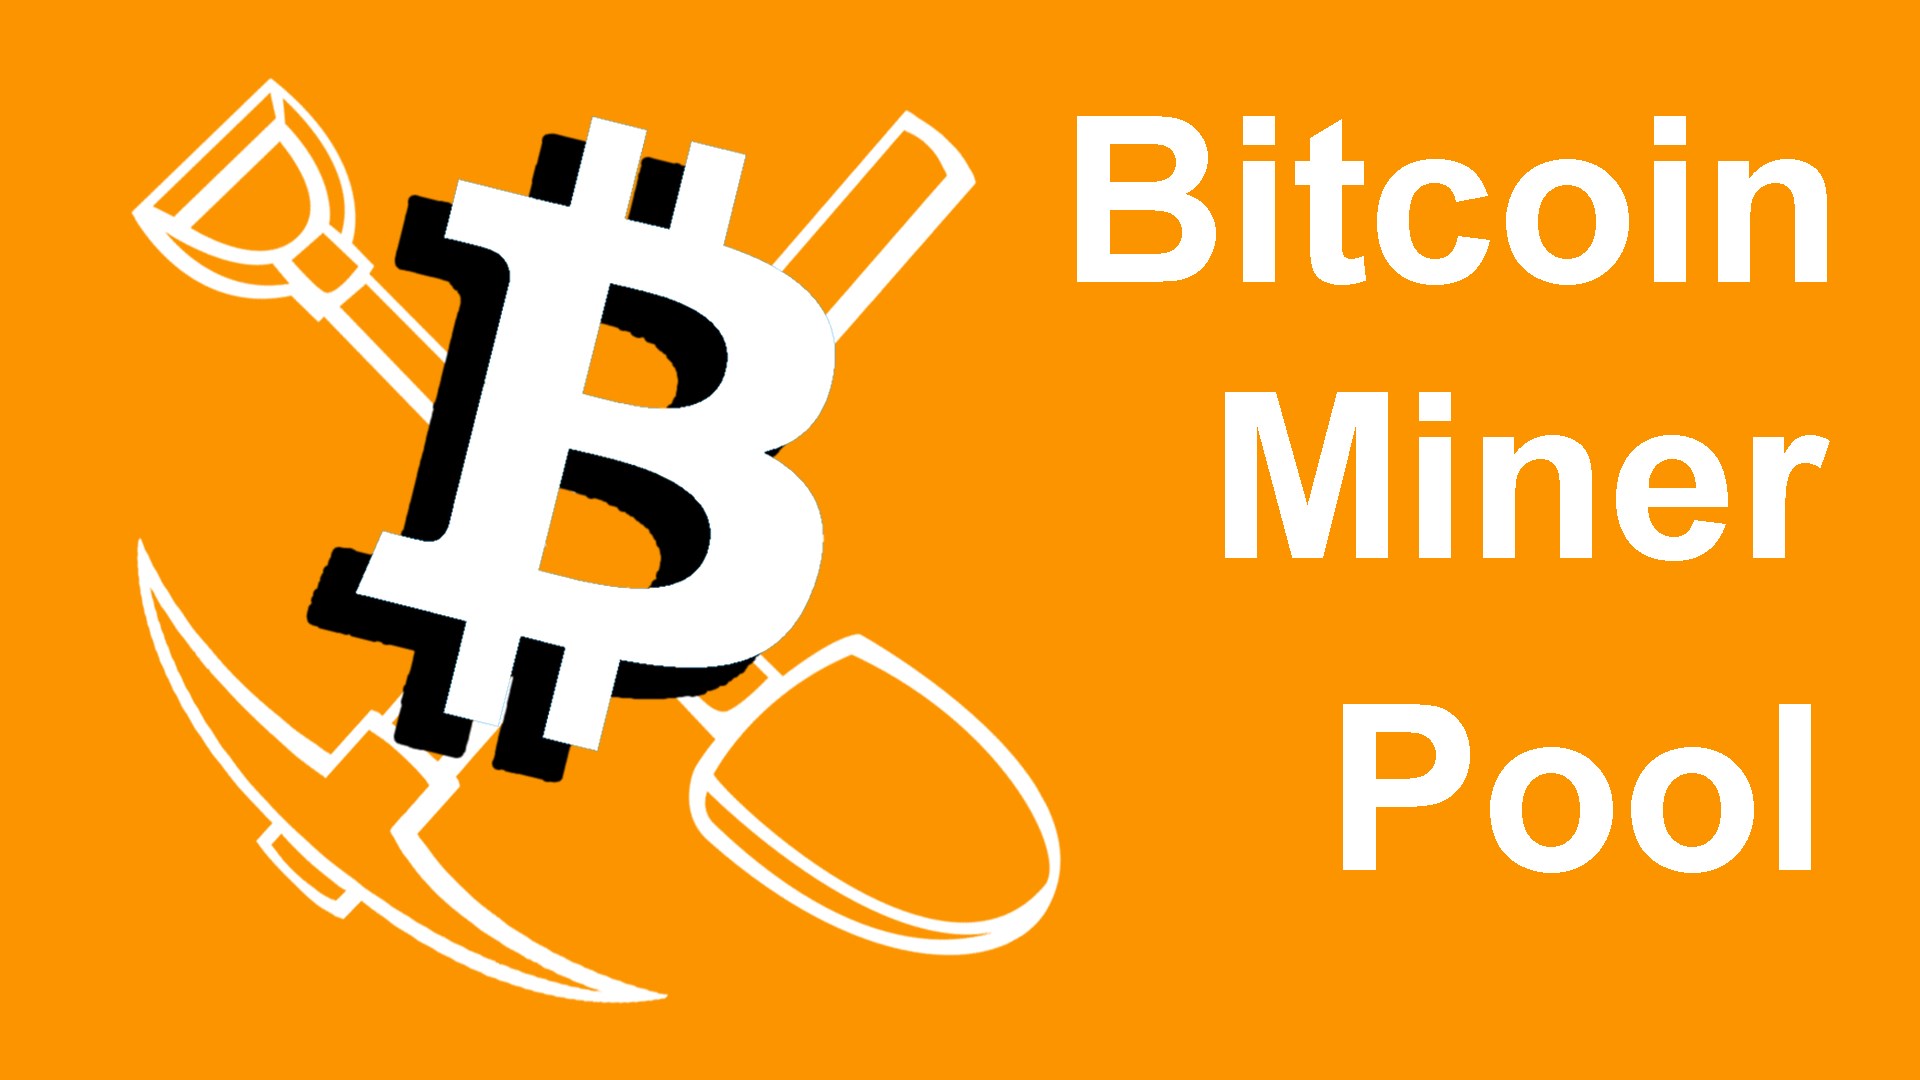 Download Free Bitcoins Without Mining Pictures